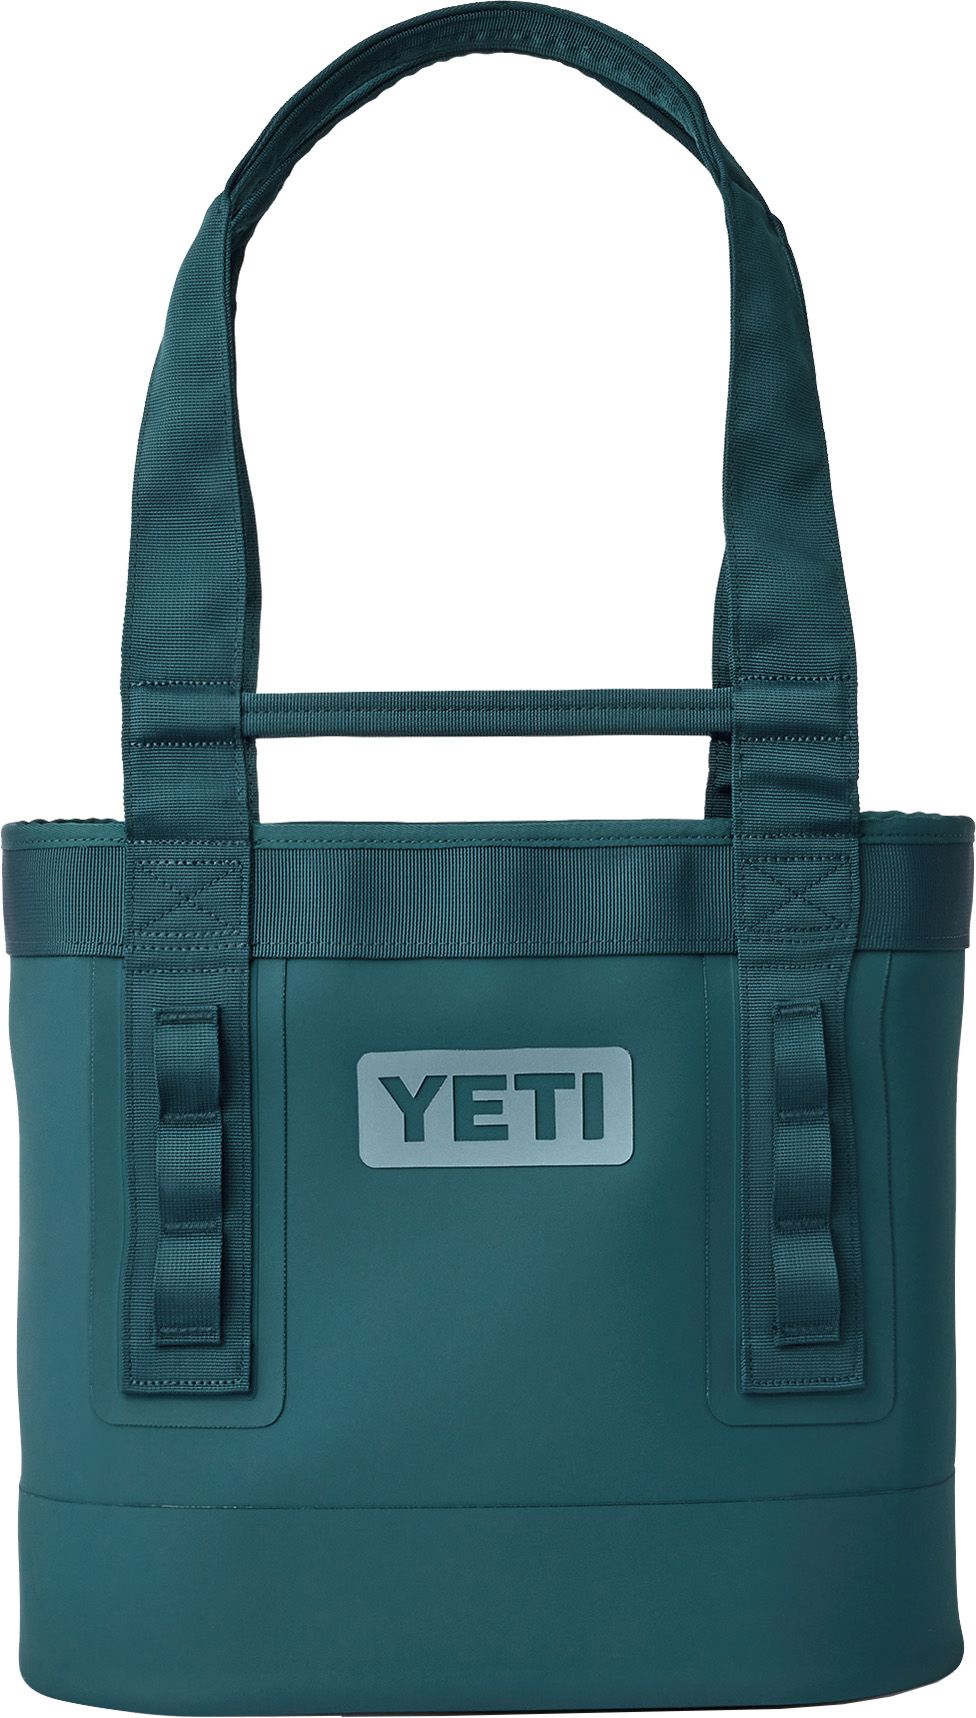 Photos - Suitcase / Backpack Cover Yeti Camino 20 Carryall Tote Bag, Men's, Agave Teal 22YETUCMN20CRRYLLREC 